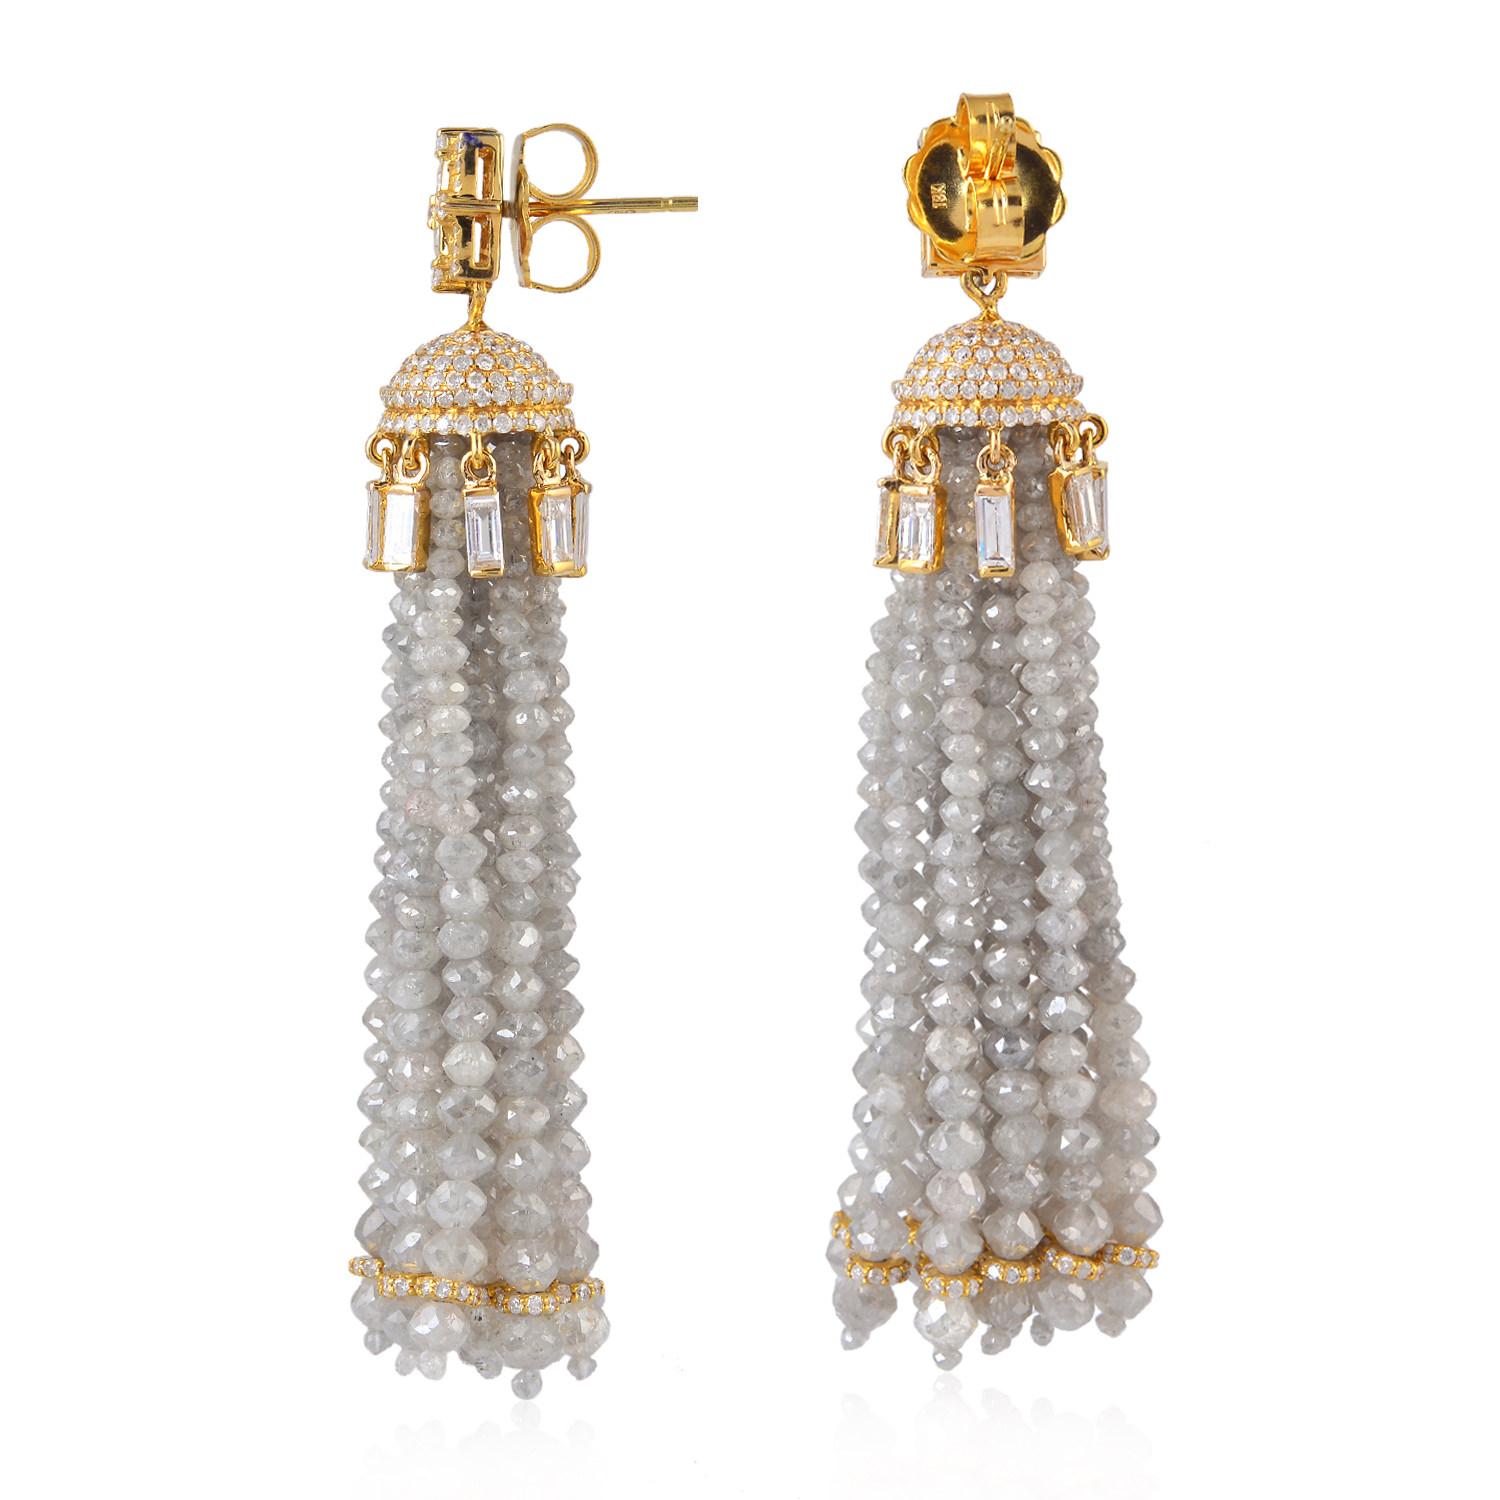 These exceptional tassel earrings are handmade in 18-karat gold and set with 86.53 carats of glittering diamonds.

FOLLOW  MEGHNA JEWELS storefront to view the latest collection & exclusive pieces.  Meghna Jewels is proudly rated as a Top Seller on